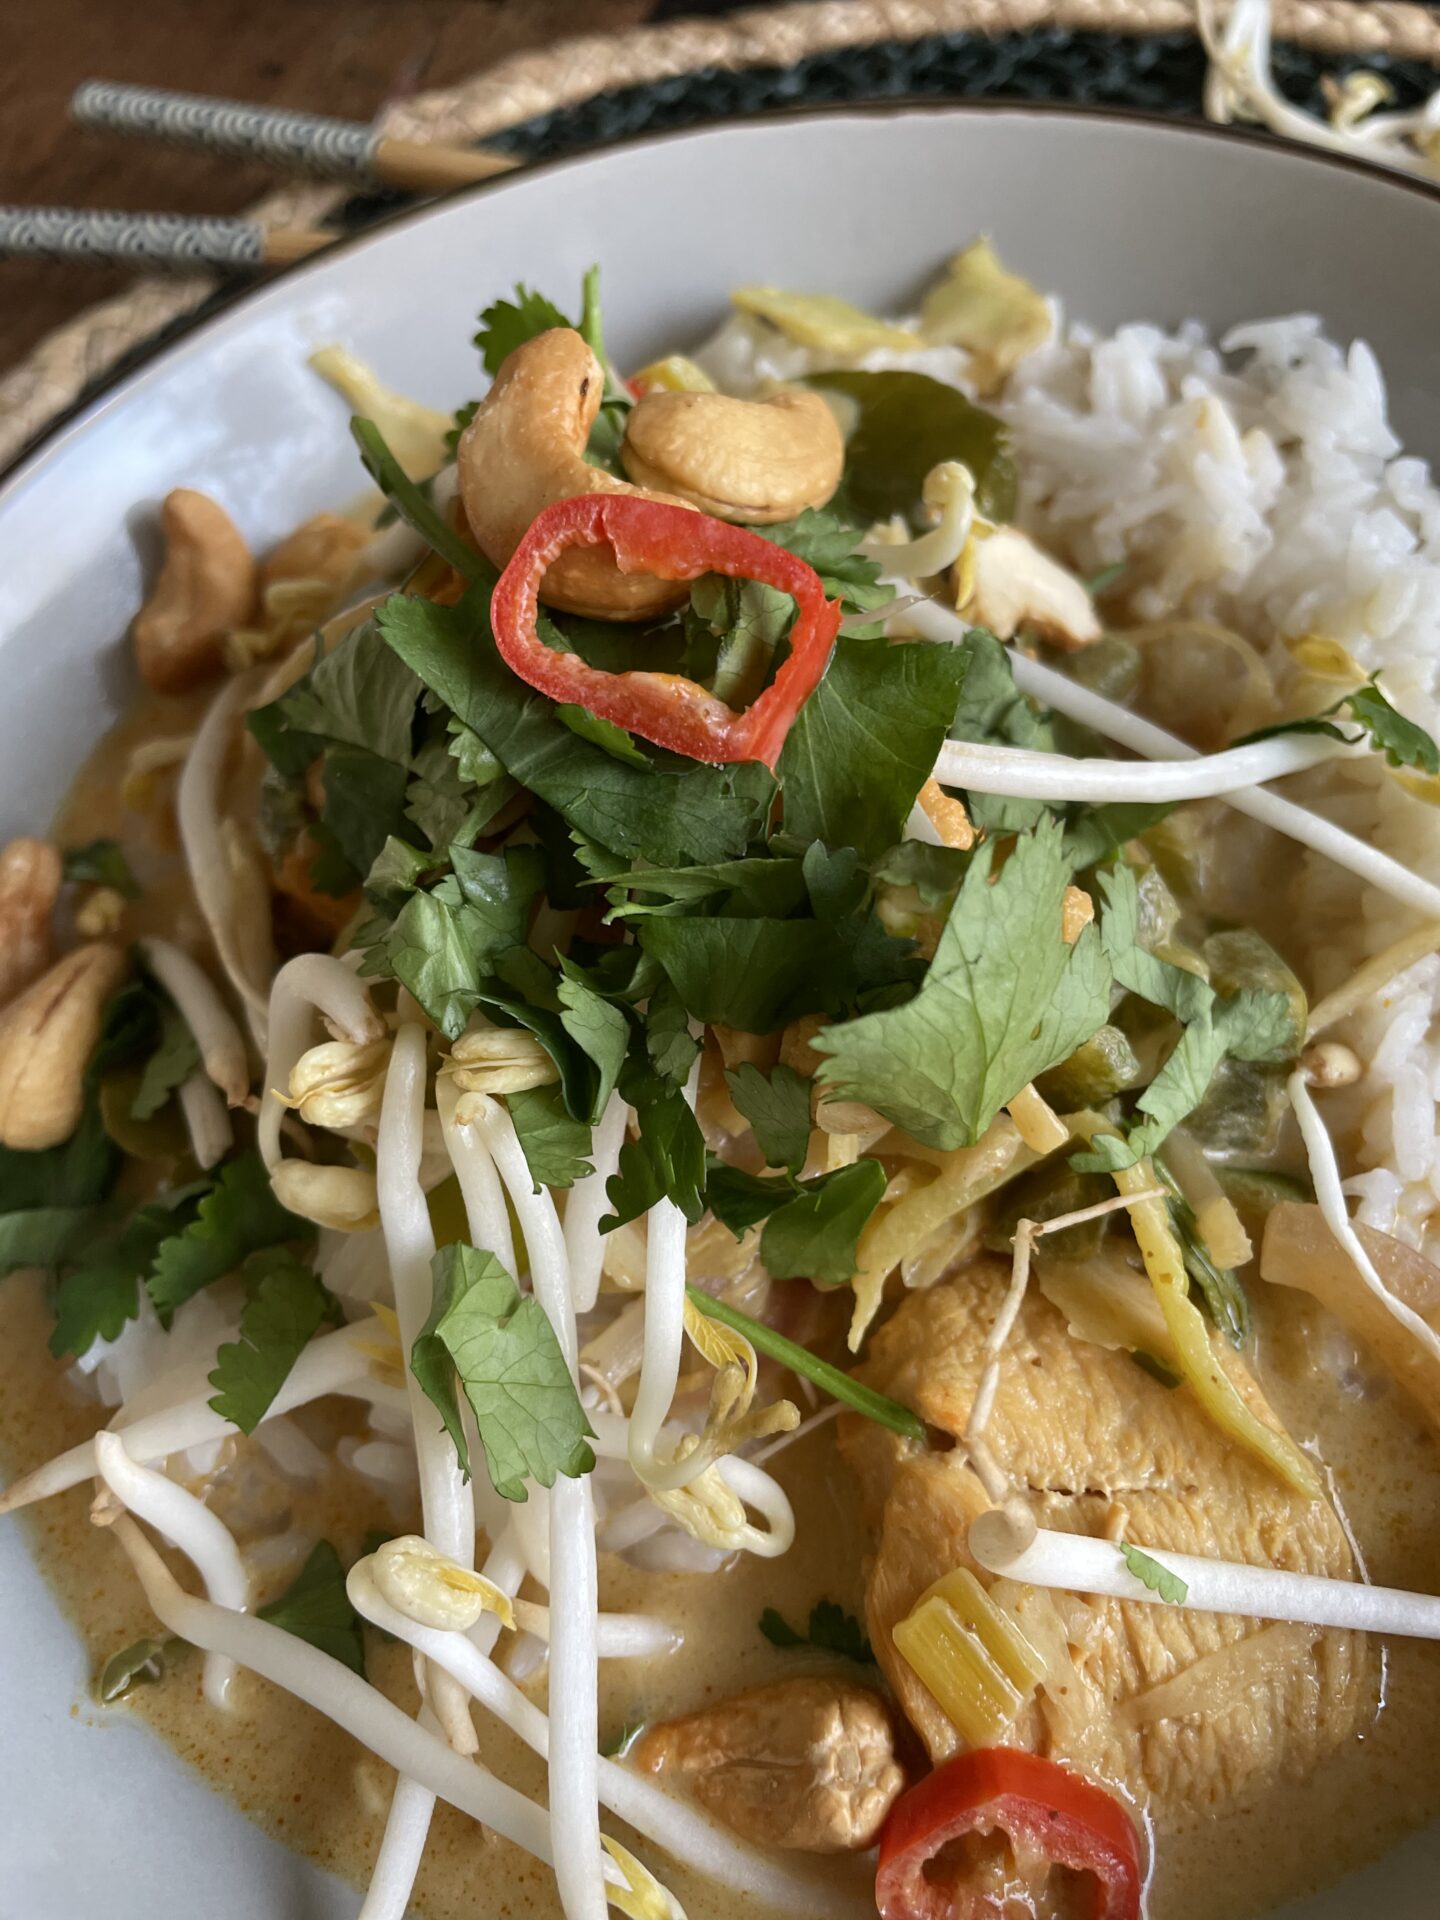 Thaise rode curry met kip - Foodblog Foodinista